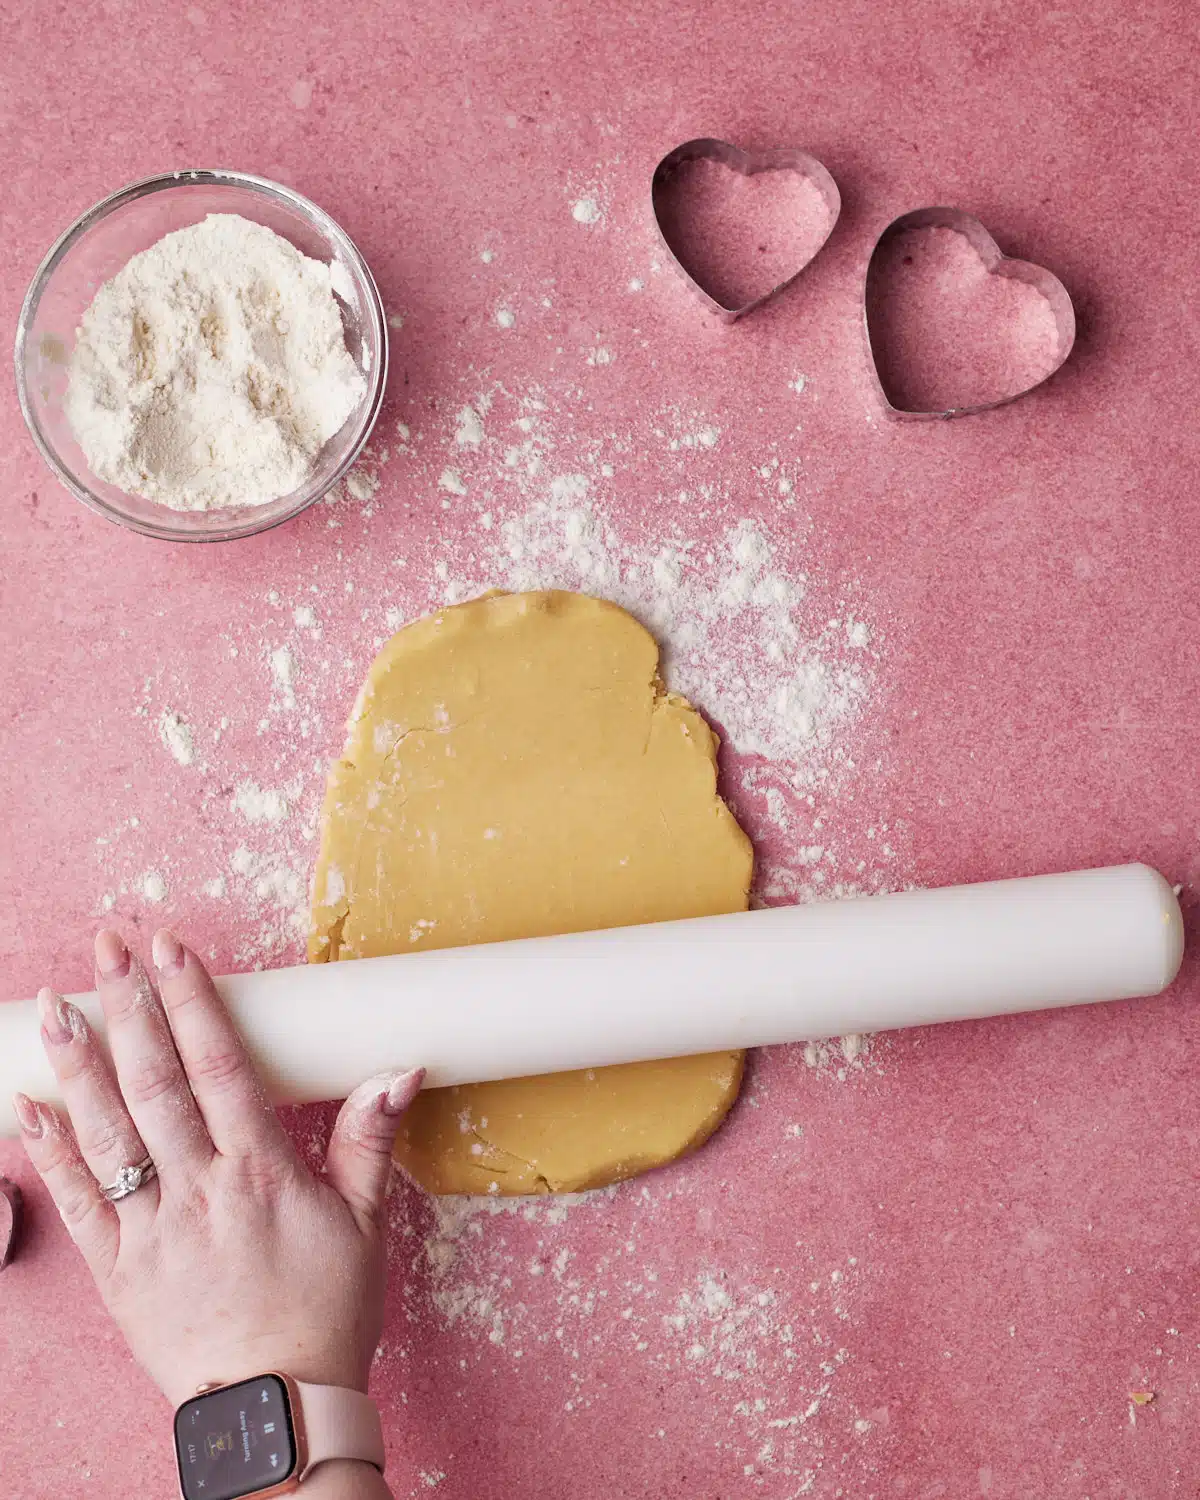 Rolling out cookie dough to make heart cookies.